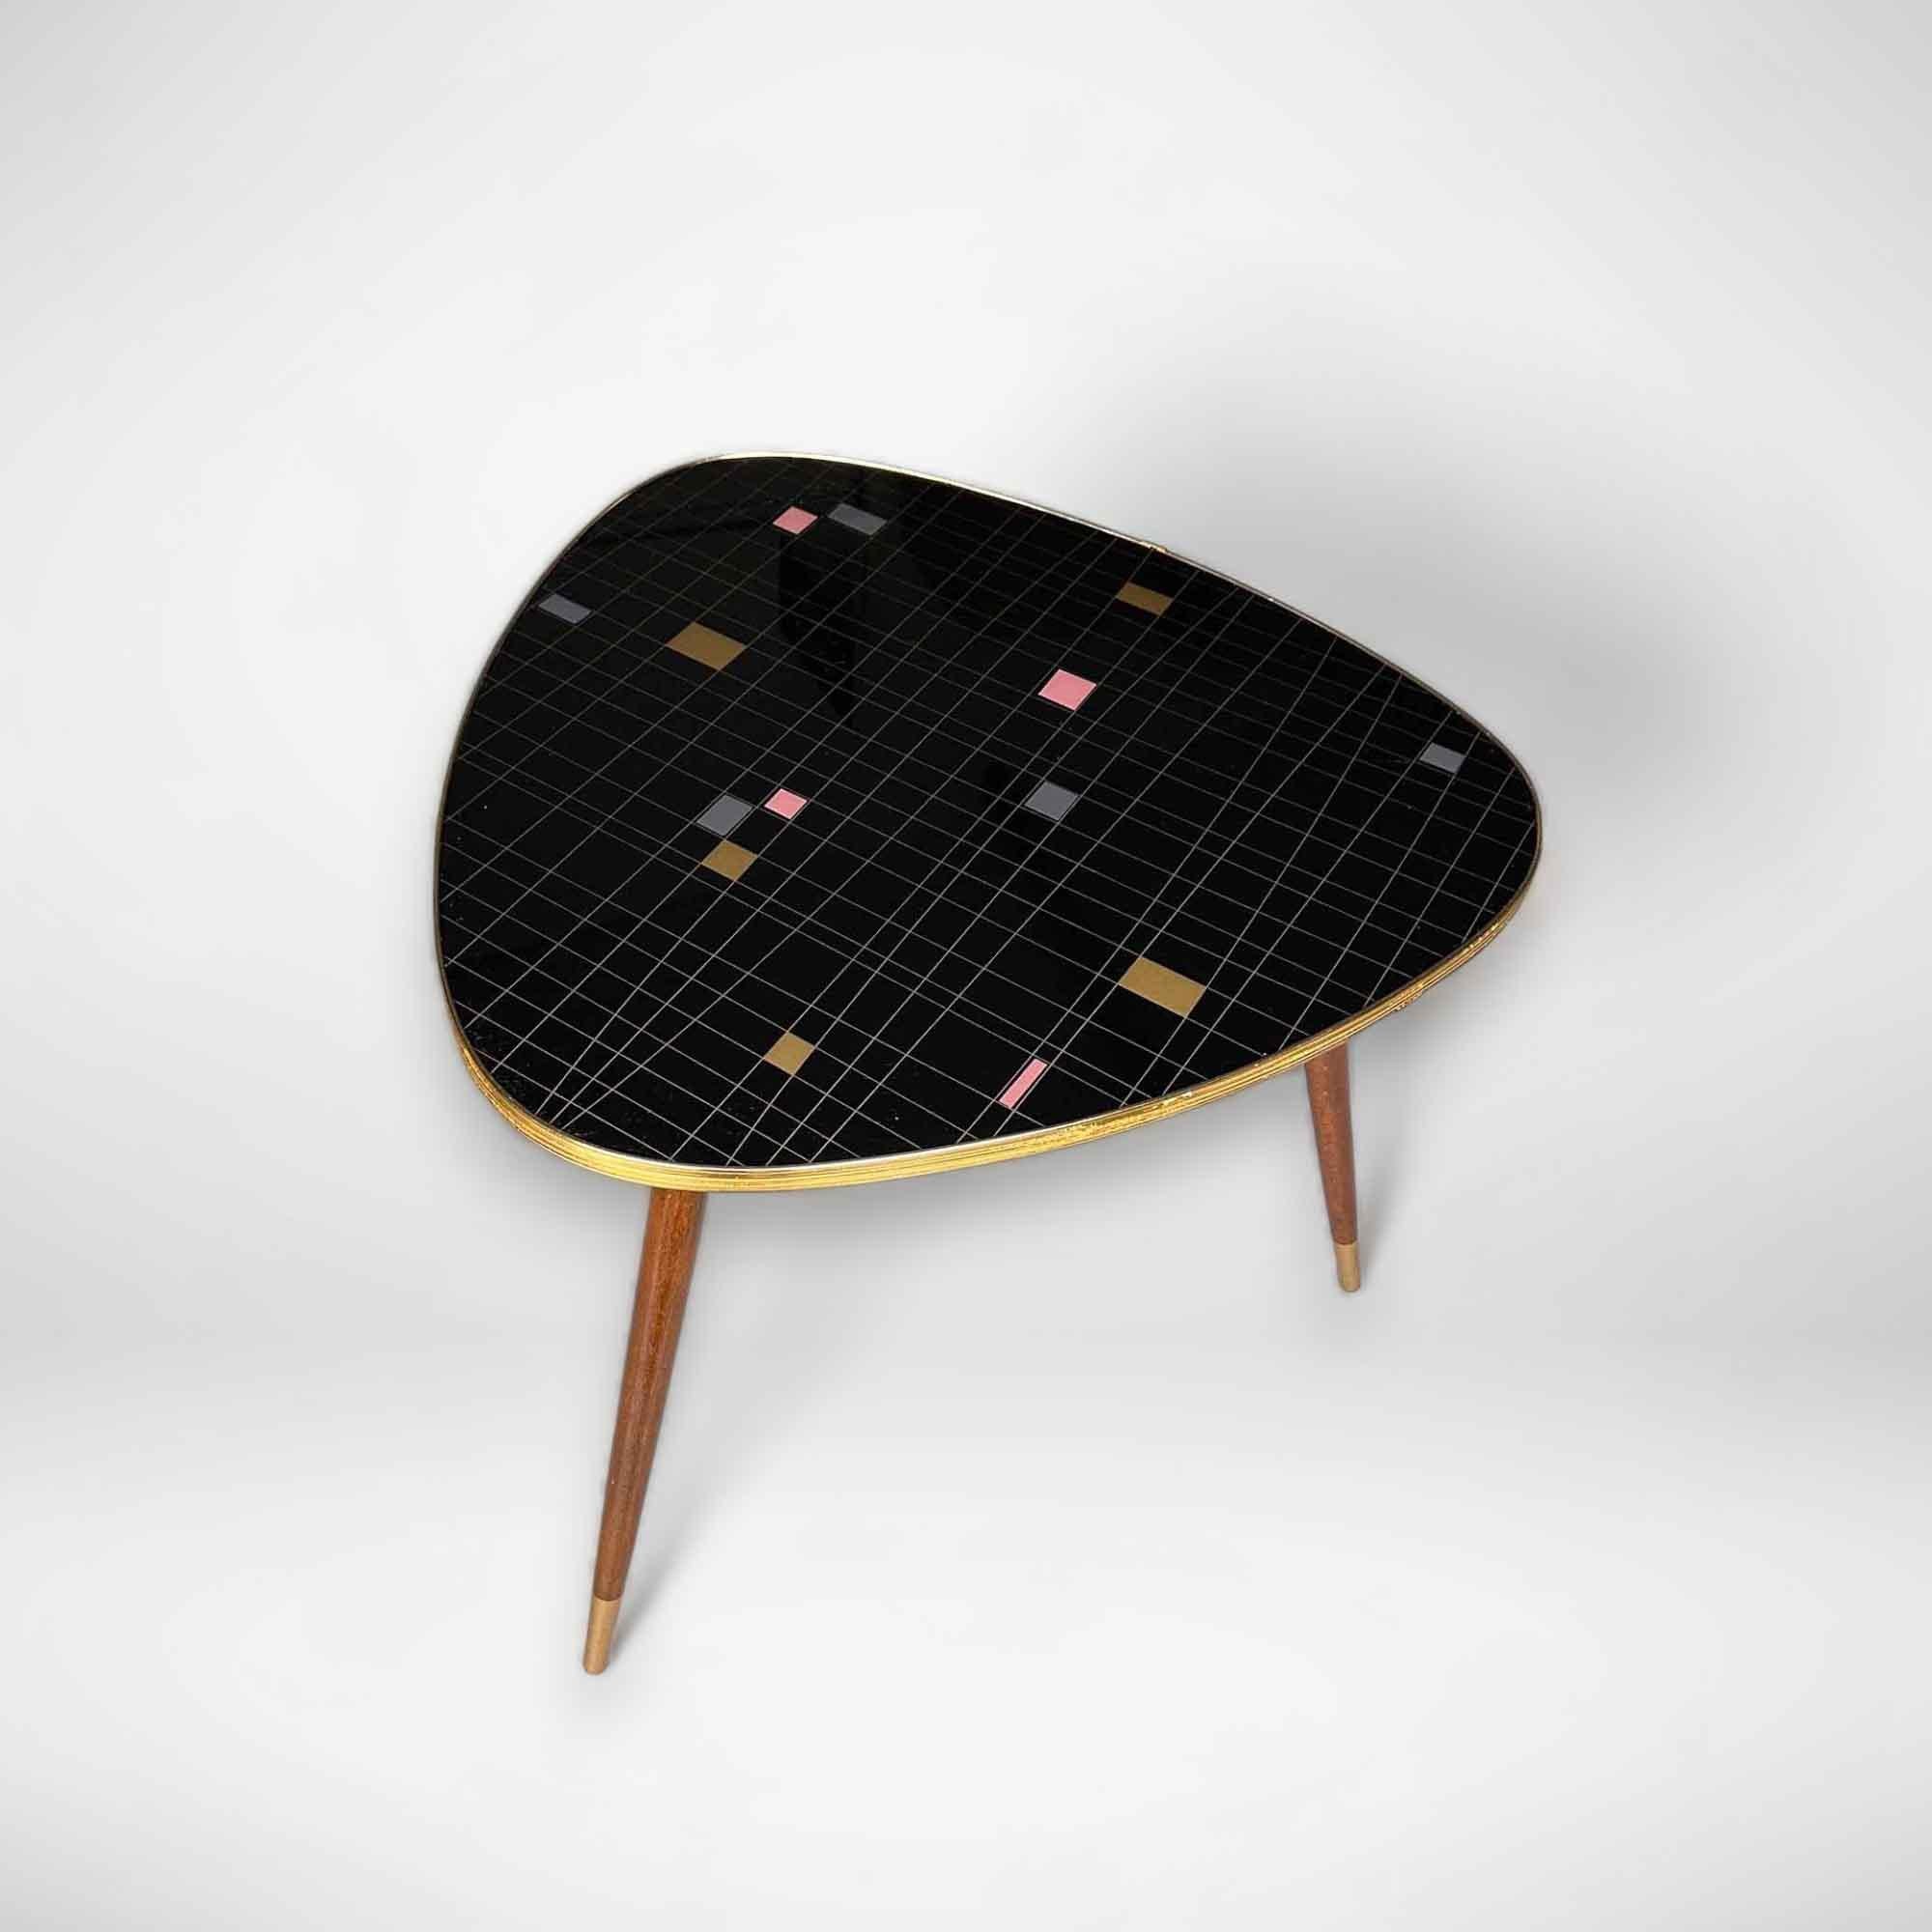 A beautiful fifties coffee table with an illustration in gold, gray, and pink on a black background. This vintage table has the typical gold edge and stands on 3 sturdy wooden legs. The style of this side table is also called 'rockabilly', 'atomic